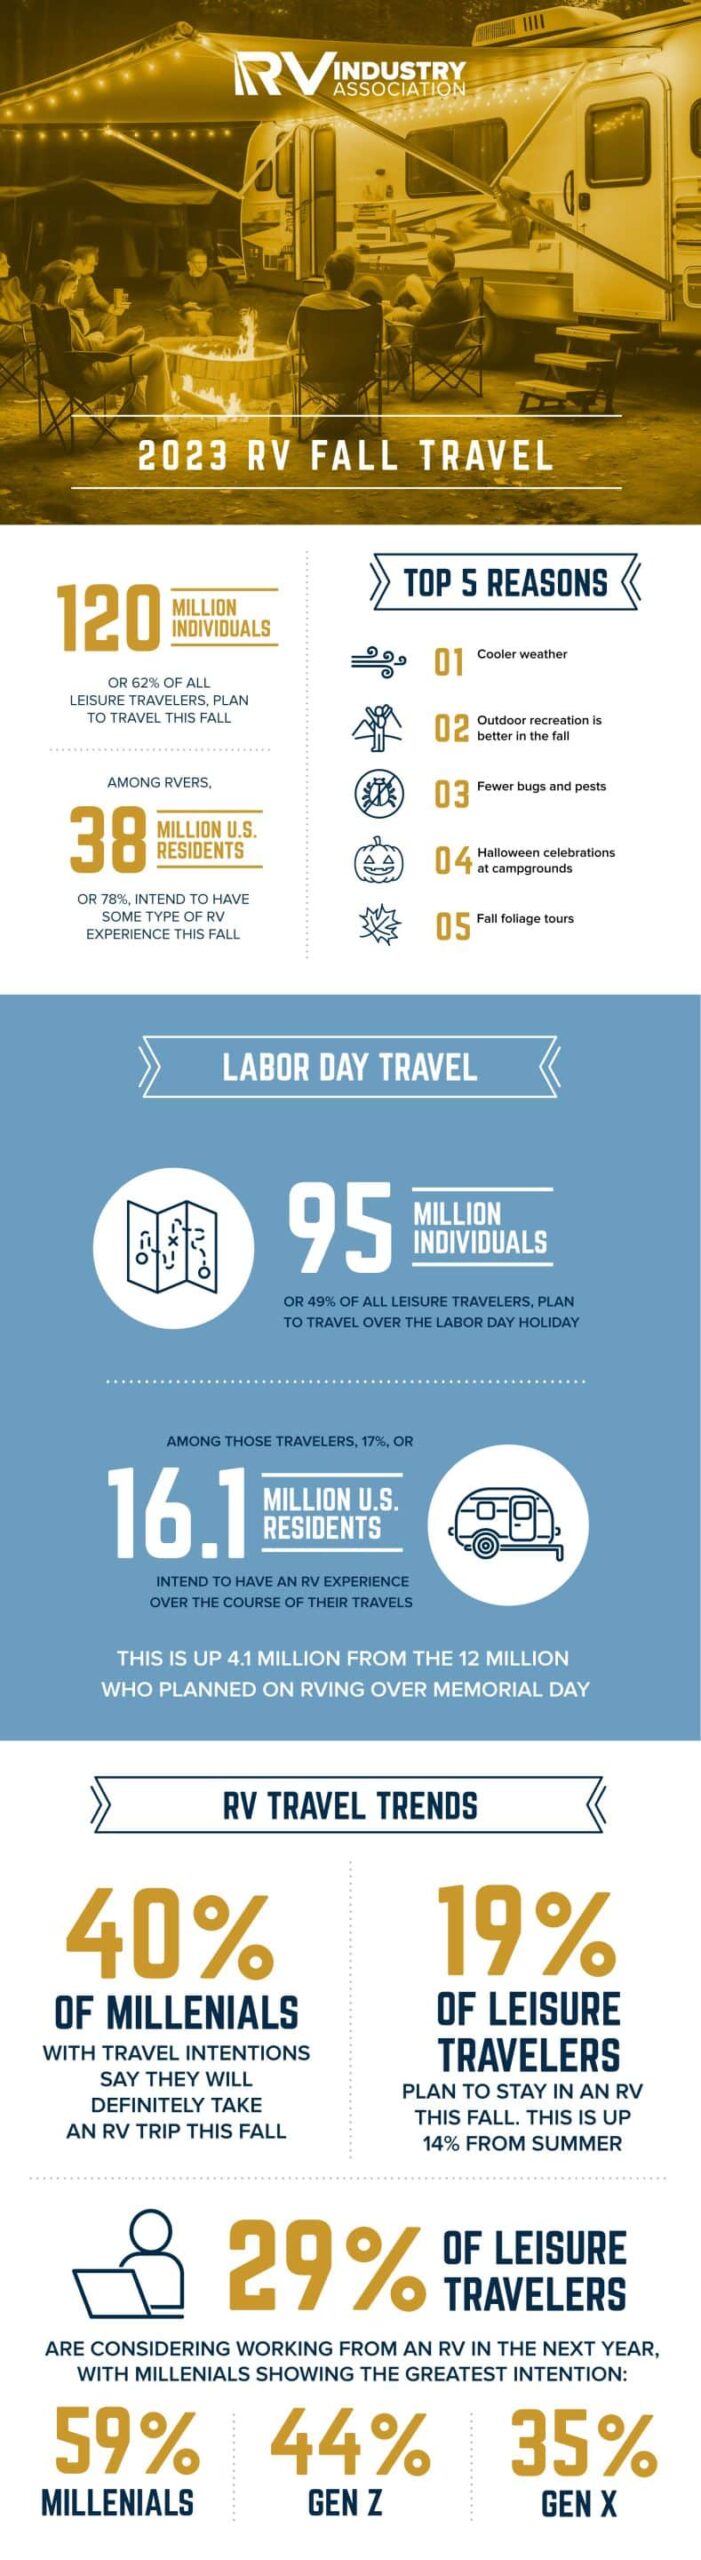 RVIA: 16 Million Americans Plan to Go RVing over Labor Day – RVBusiness – Breaking RV Industry News